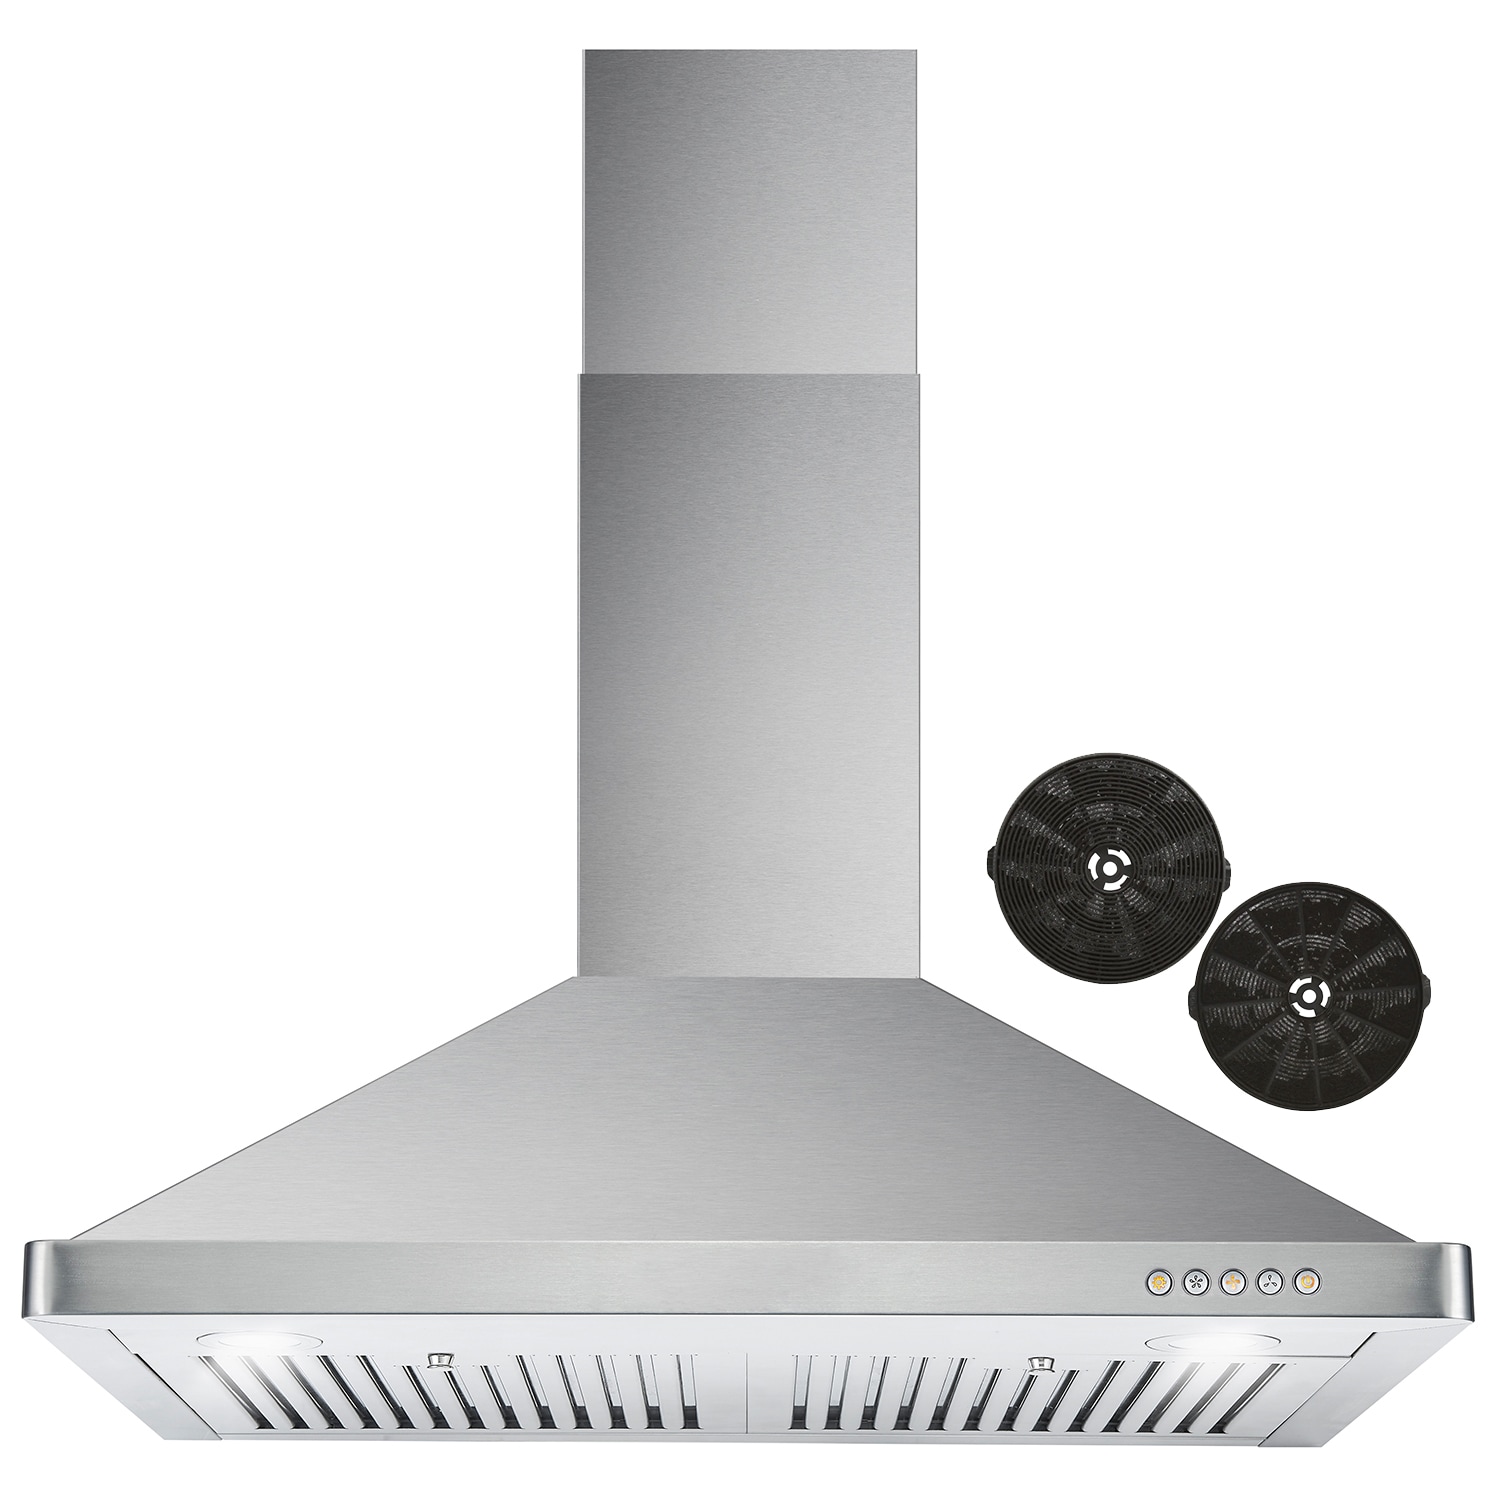 Comfee CVU30W2AST Range Hood 30 inch Ducted Ductless Vent Hood Durable Stainless Steel Kitchen Hood for Under Cabinet with 2 Reusable Filter, 200 CFM